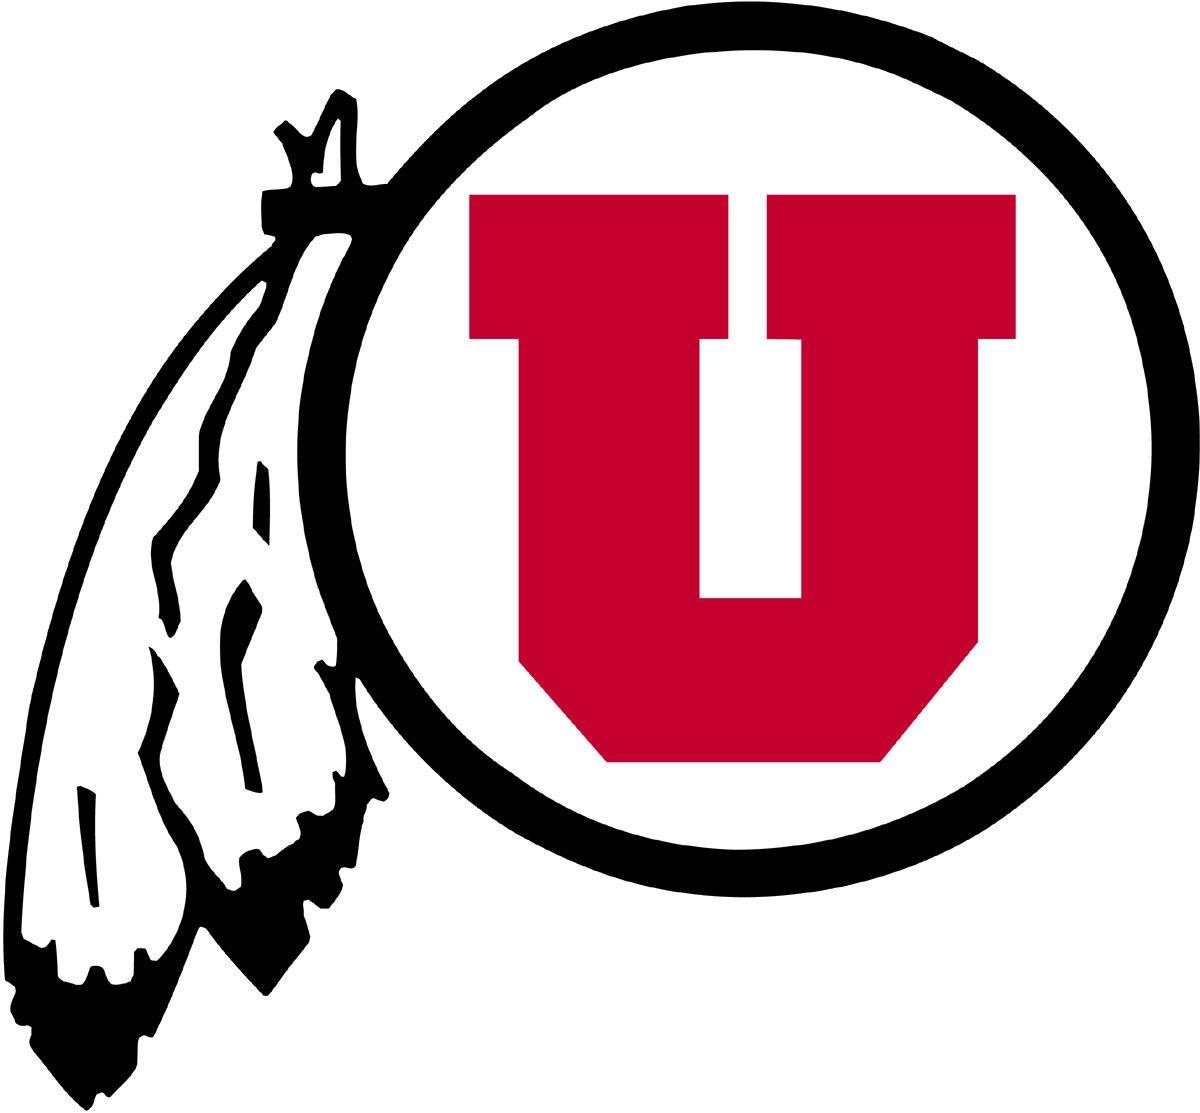 University of Utah Drum and Feather Logo - Utah Utes Made the Right Move in Keeping Its Drum and Feather Logo ...